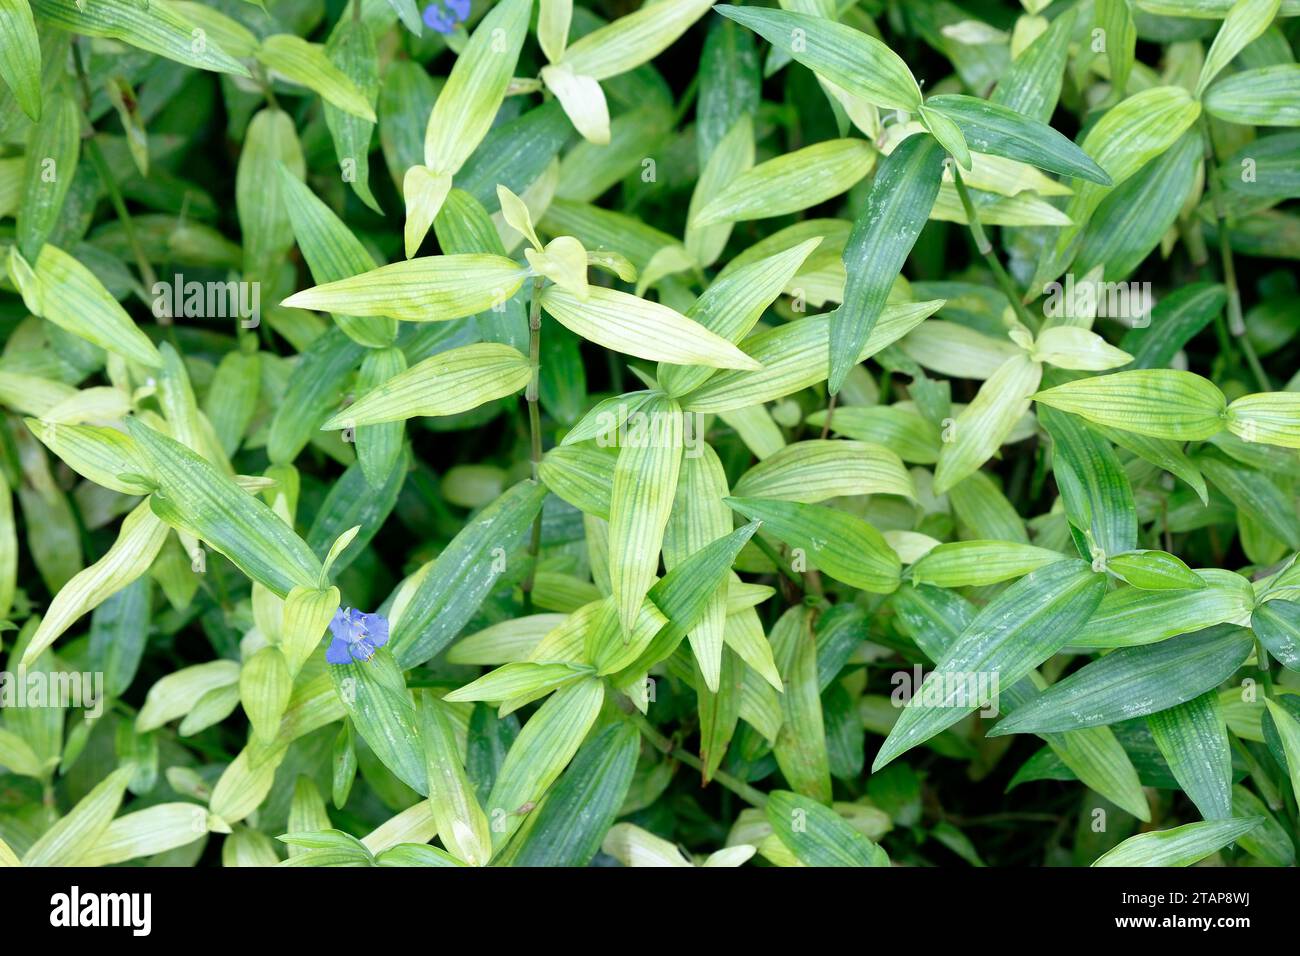 Background photo set Dayflower, green and light green, the Asian dayflower is considered a weed. Stock Photo